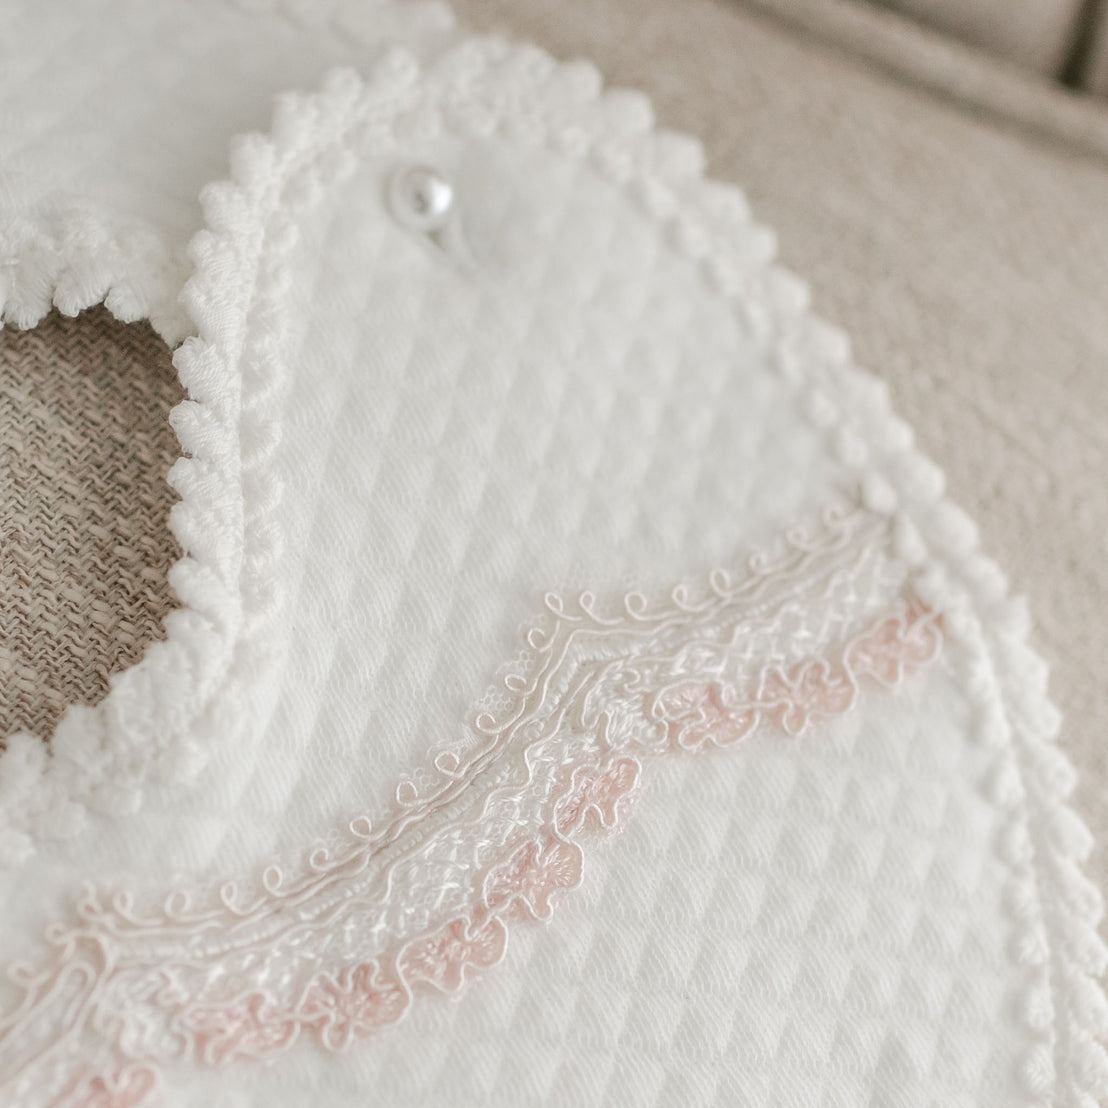 Close-up of an upscale, Elizabeth Bib with delicate lace trim and an embroidered christening design, featuring a single button closure, displayed on a soft textured surface.